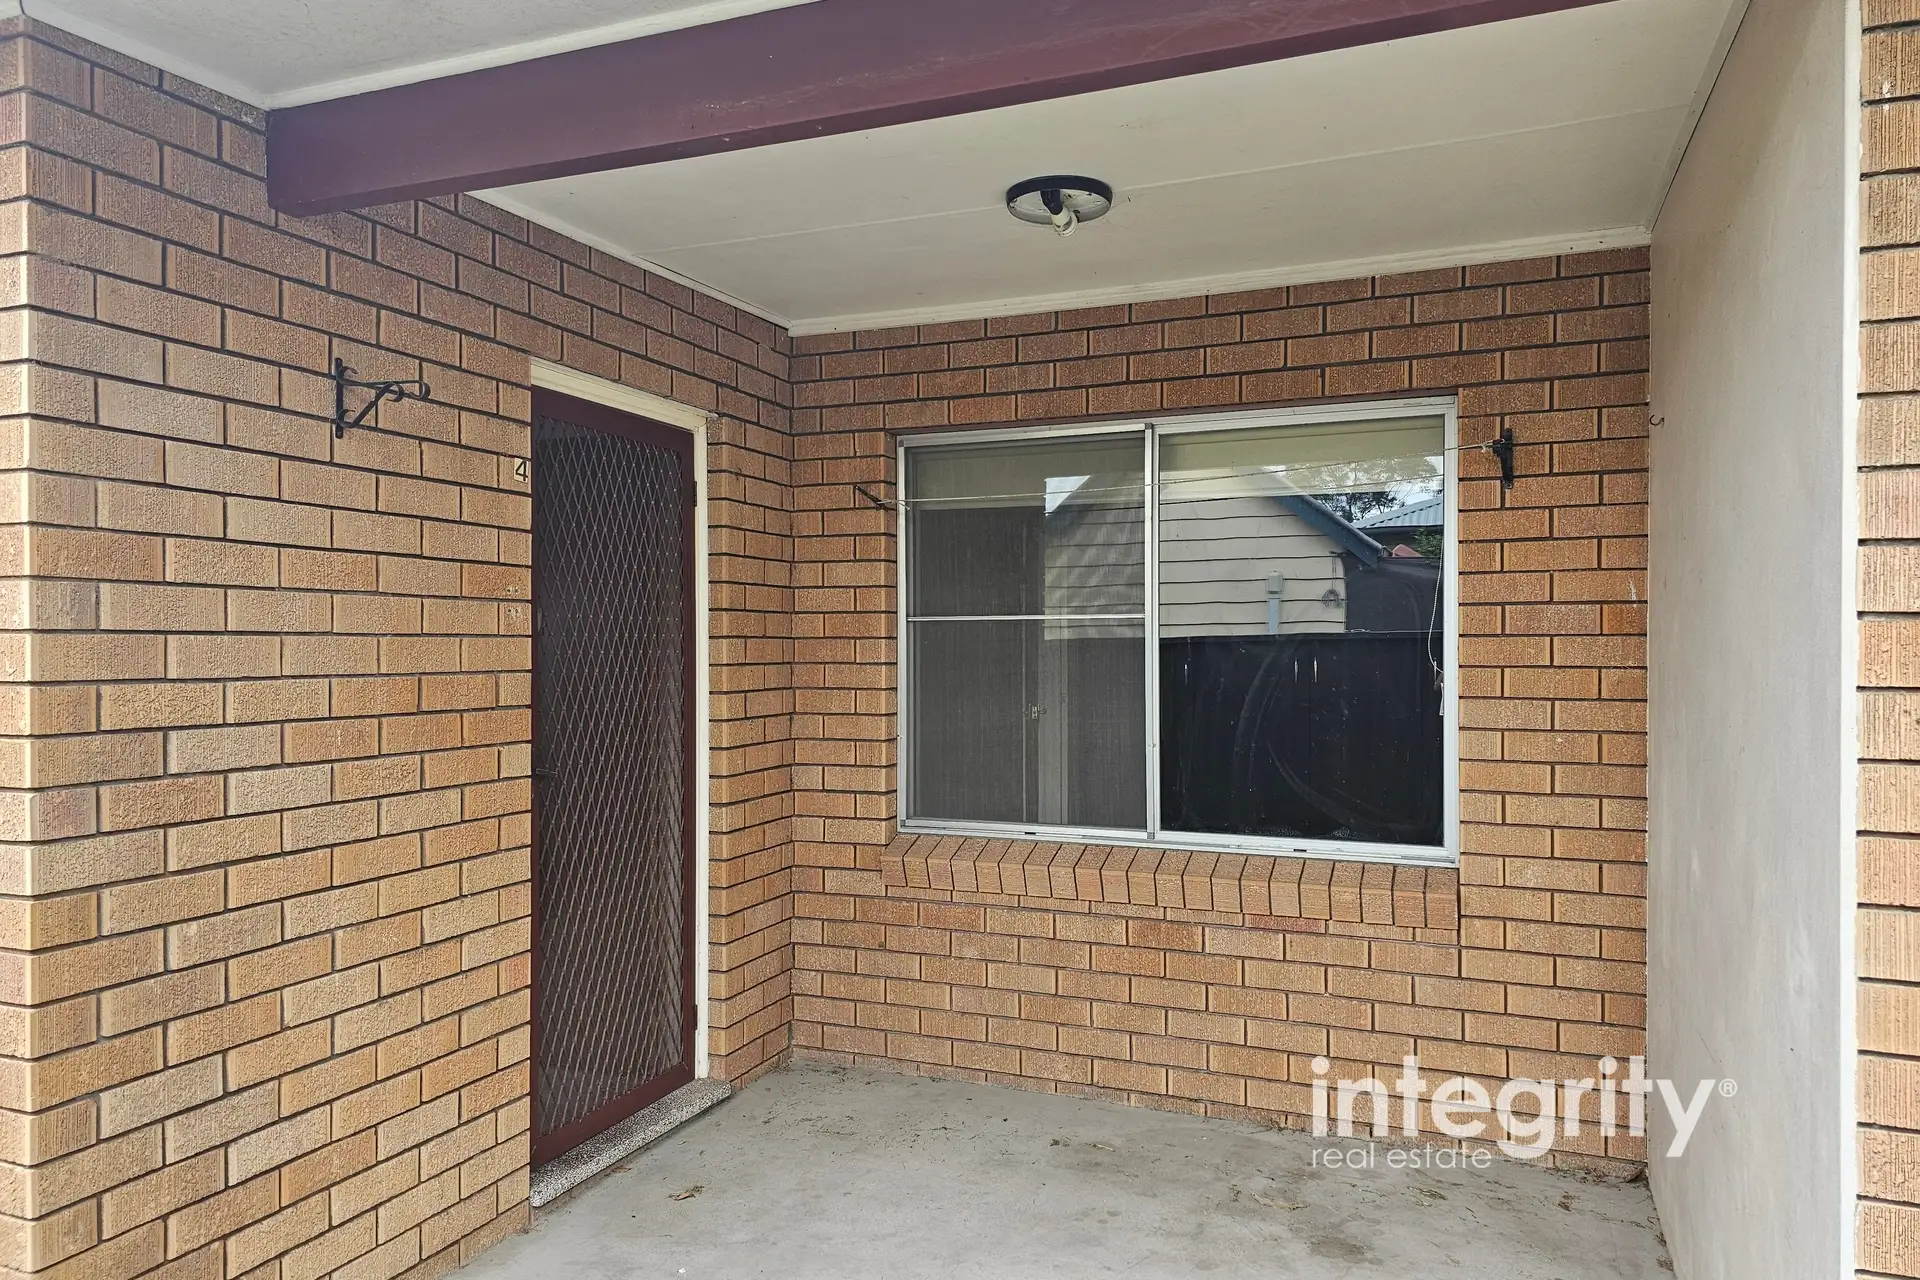 4/32 Birriley Street, Bomaderry Leased by Integrity Real Estate - image 1